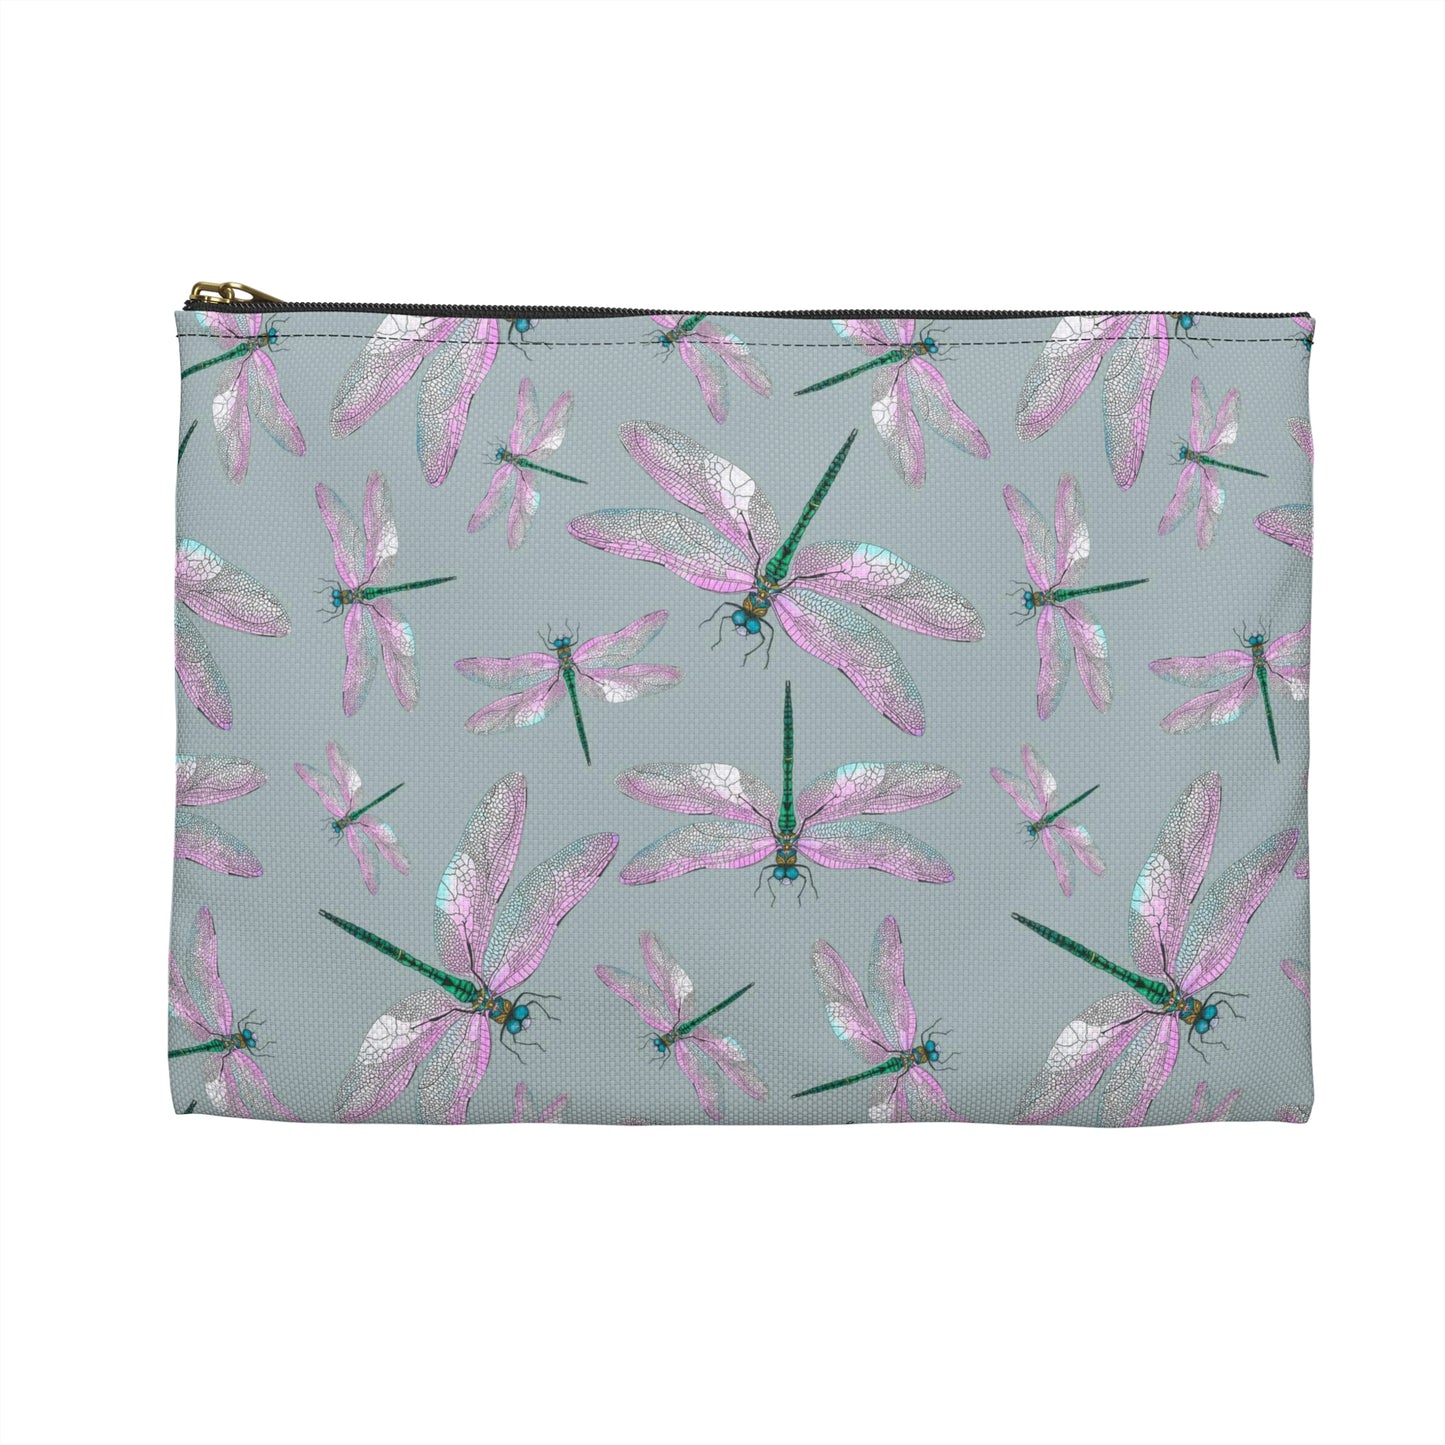 Dragonfly Makeup Bag / Blue Cosmetic Pouch